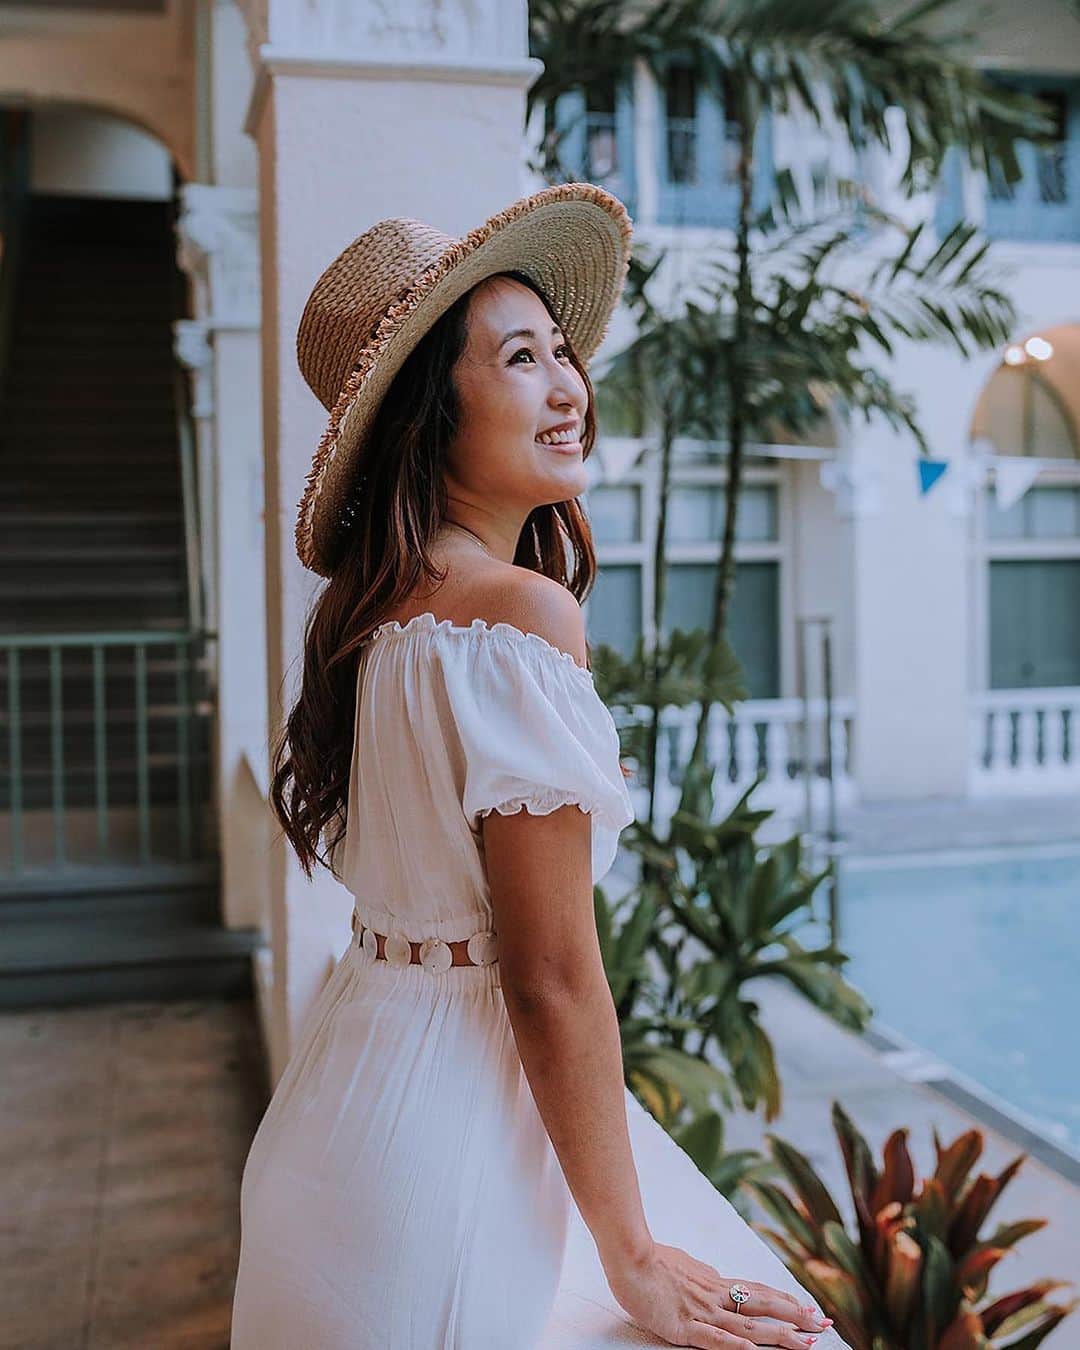 Angels By The Sea Hawaii Waikiki Based Boutiques ?Original clothing designed さんのインスタグラム写真 - (Angels By The Sea Hawaii Waikiki Based Boutiques ?Original clothing designed Instagram)「My Date Dress with @angelsbythesea  定番人気のエンジェルドレス。 腰の部分は肌がチラリと見えるポイントにも なっており、本物のシェルが使われています🐚  Beautiful Angel Dress features real abalone shells just above the waist, which gives it a fun and unique look.  👗 Angel Long Dress 📸 @townie.tay & @mdee_photo Thank you💕 📍 Honolulu, Hawaii  @angelsbythesea has been Hawaii’s resort fashion brand based in Honolulu, Hawaii, since 2010. Please visit our online store 🌺www.angelsbytheseahawaii.com Owner Designer Nina Thai (Miss Waikiki) @nina_bythesea (日本語勉強中📚🙇🏻‍♀️) Please feel free to tag your pic for a chance to be featured!  ハワイのリゾートファッション、 エンジェルズバイザシー はミスワイキキである Nina Thai によって作られたハワイオリジナルファッションブランドです🌴日本語ウェブサイトはこちら www.angelsbytheseahawaii.jp  ハワイやリゾートファッションが好きな人は是非私達のアカウントをフォローして下さい🙌また私達の商品をポストする際にタグ付けしていただいたら私達からリポストされるチャンスがあります  #angelsbytheseahawaii #angelsbythesea #resortwear #hawaii #waikiki #datenightoutfit #maxidresses  #ハワイ #ワイキキ #カイルア #ラニカイビーチ #シンプルコーデ #ハワイ好きな人と繋がりたい #エンジェルズバイザシーハワイ #エンジェルズバイザシー #リゾートファッション #ハワイに恋して #デート服 #マキシワンピース」8月31日 7時58分 - angelsbythesea